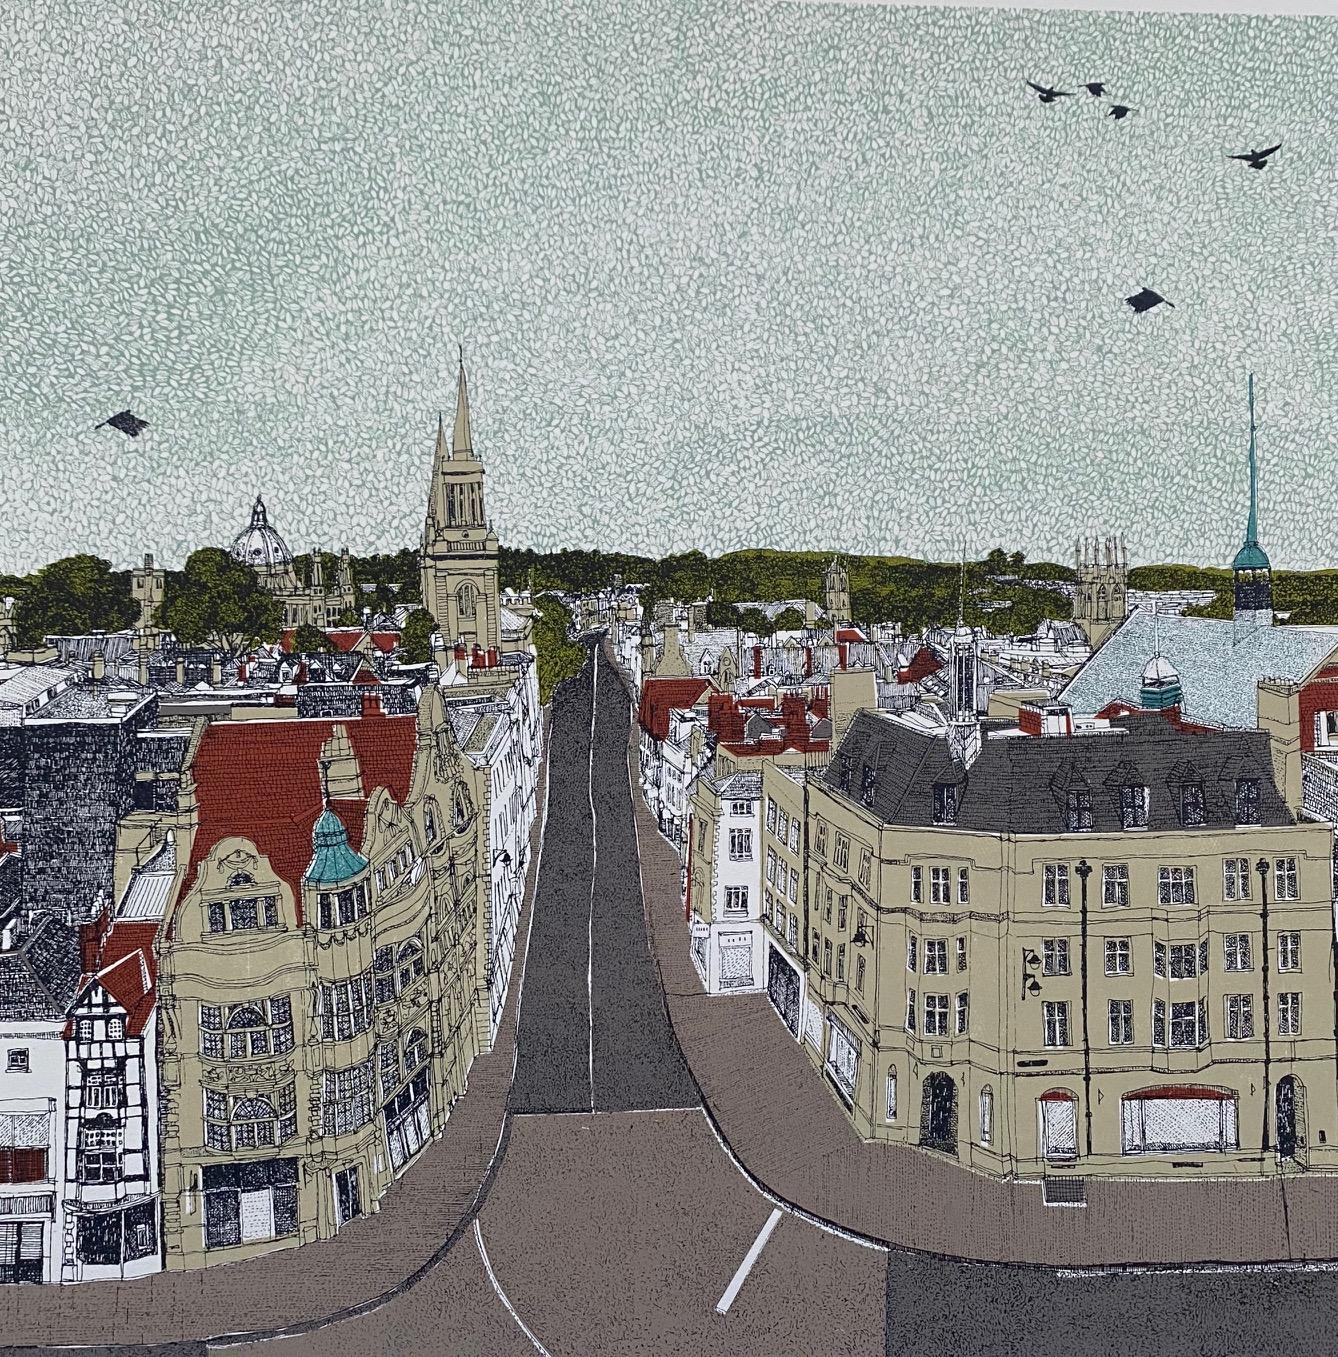 Clare Halifax Landscape Print - View From Carfax Tower, Oxford BY CLARE HALIFAX, Bright Art, Limited Edition Art